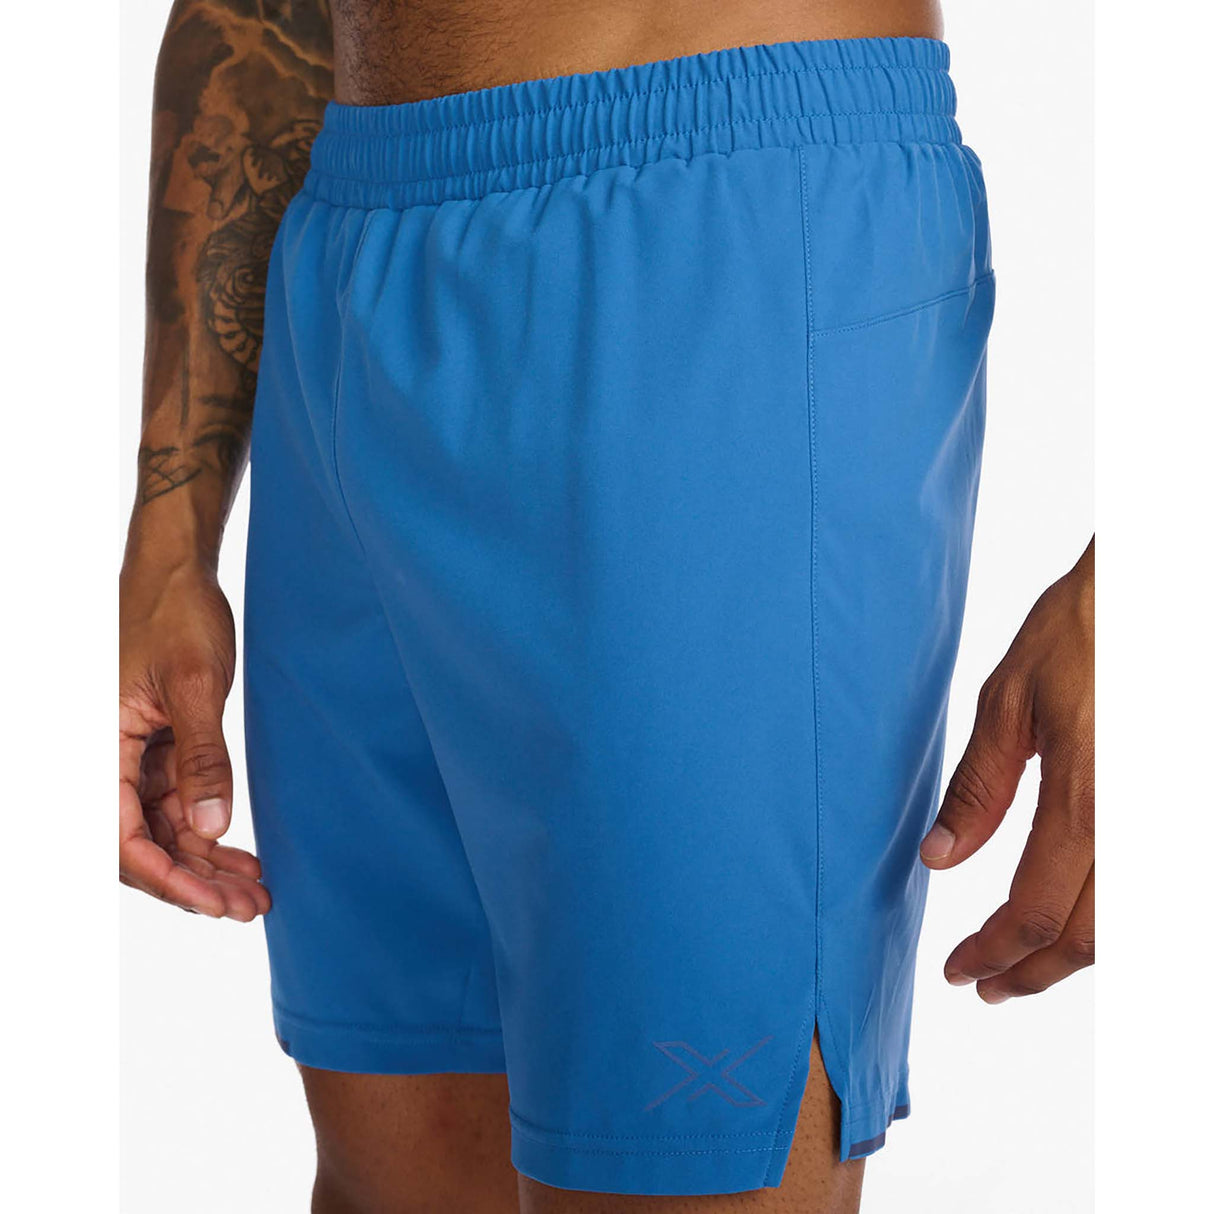 2XU Aero 7" shorts de course à pied starling medieval blue reflective homme lateral